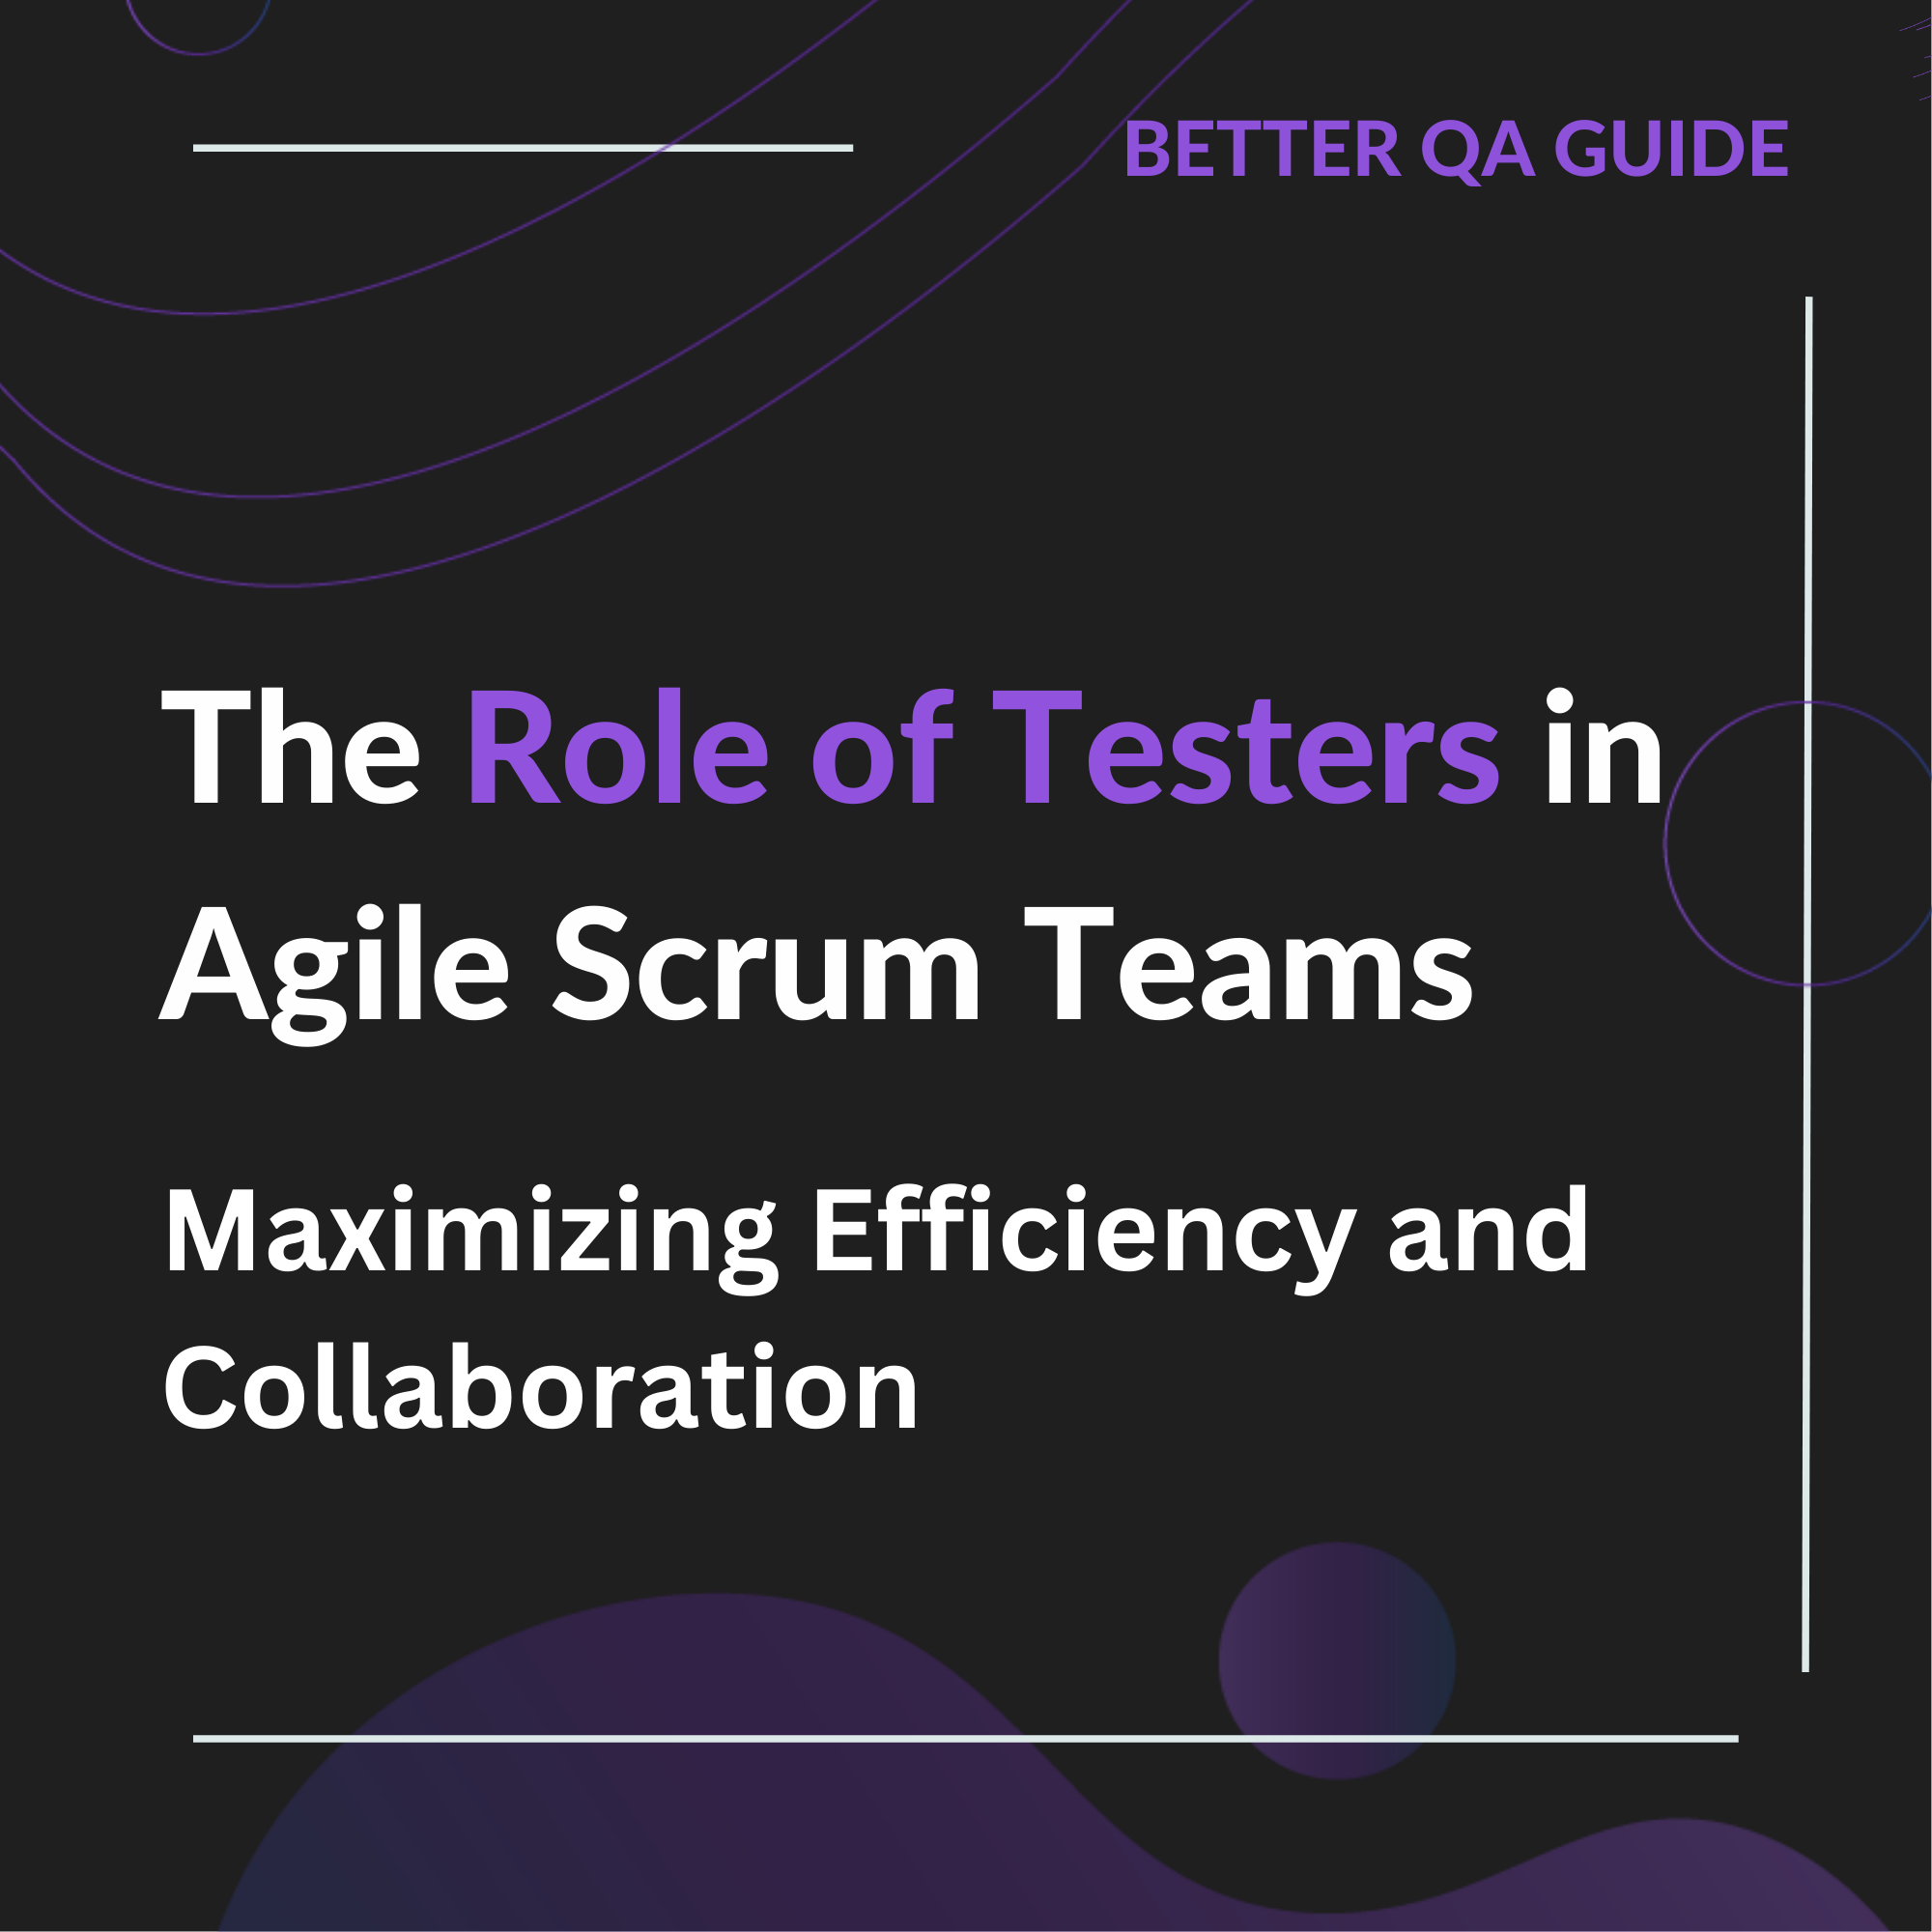 The Role of Testers in Agile Scrum Teams Maximizing Efficiency and Collaboration